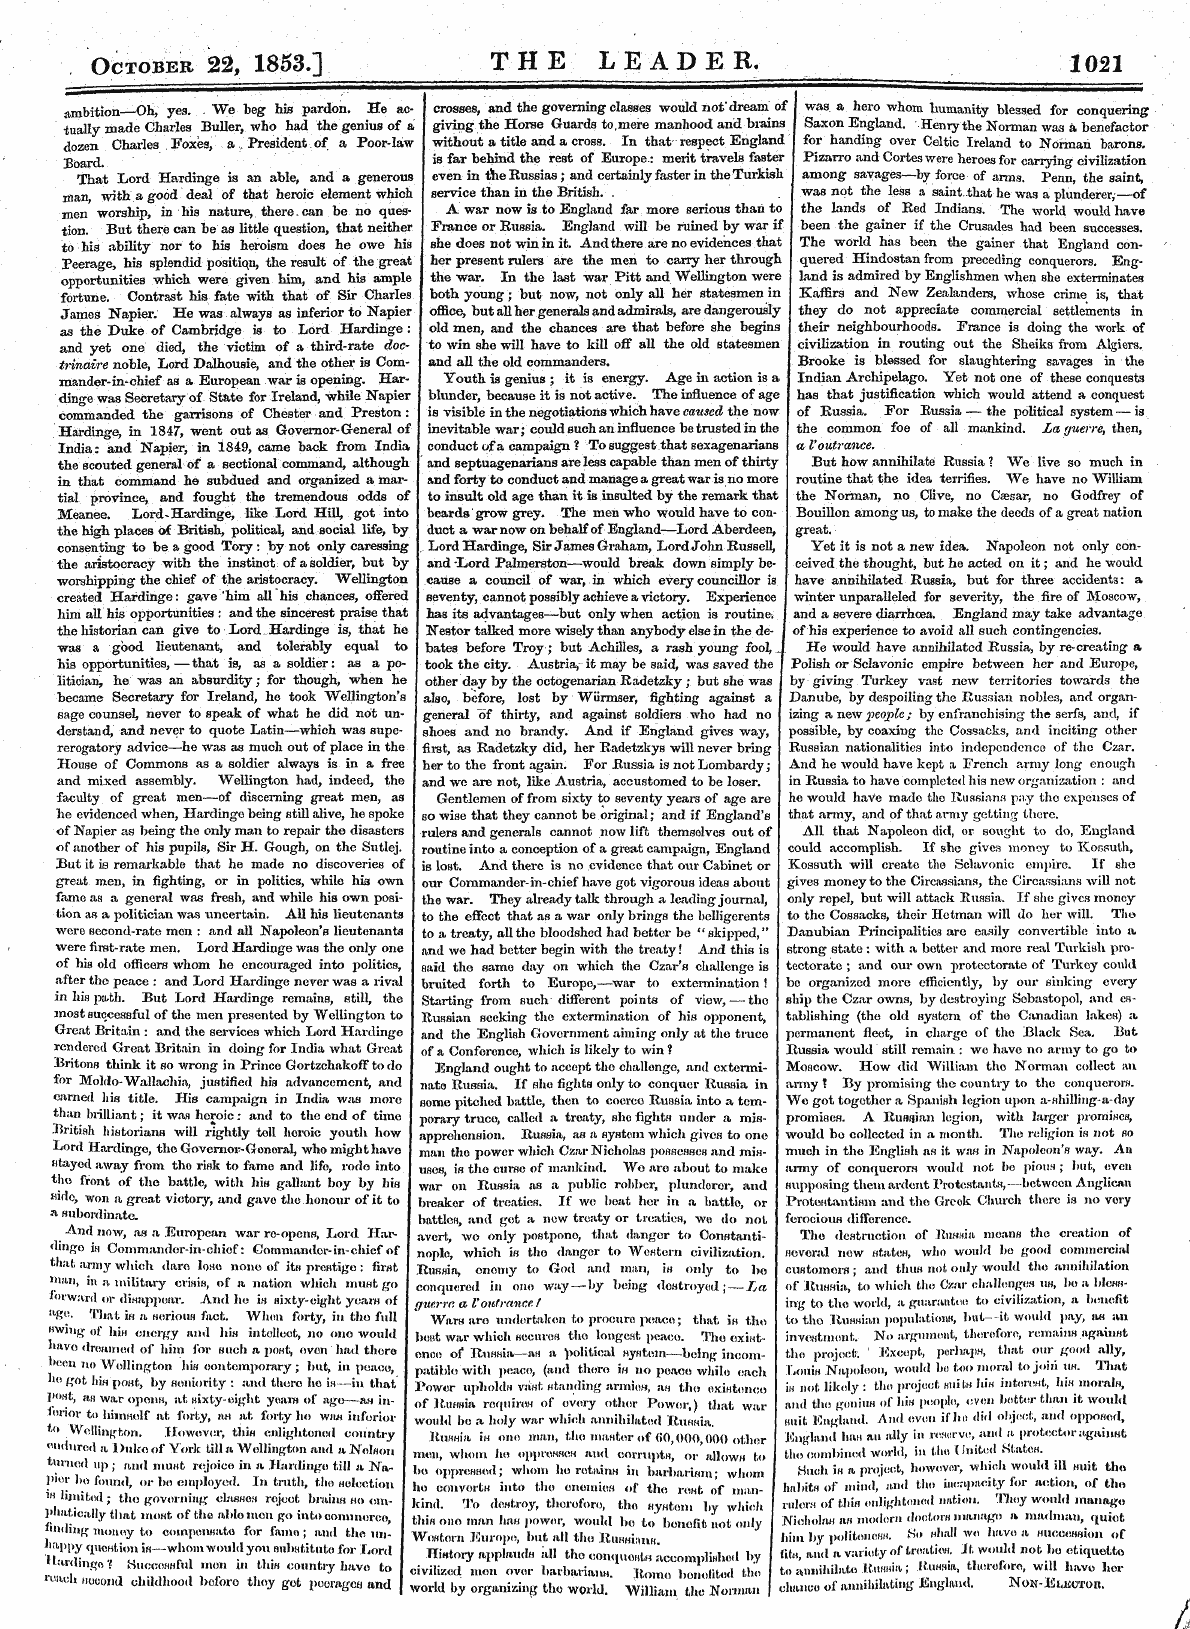 Leader (1850-1860): jS F Y, Country edition - October 22, 1853.] The Leader. 1021